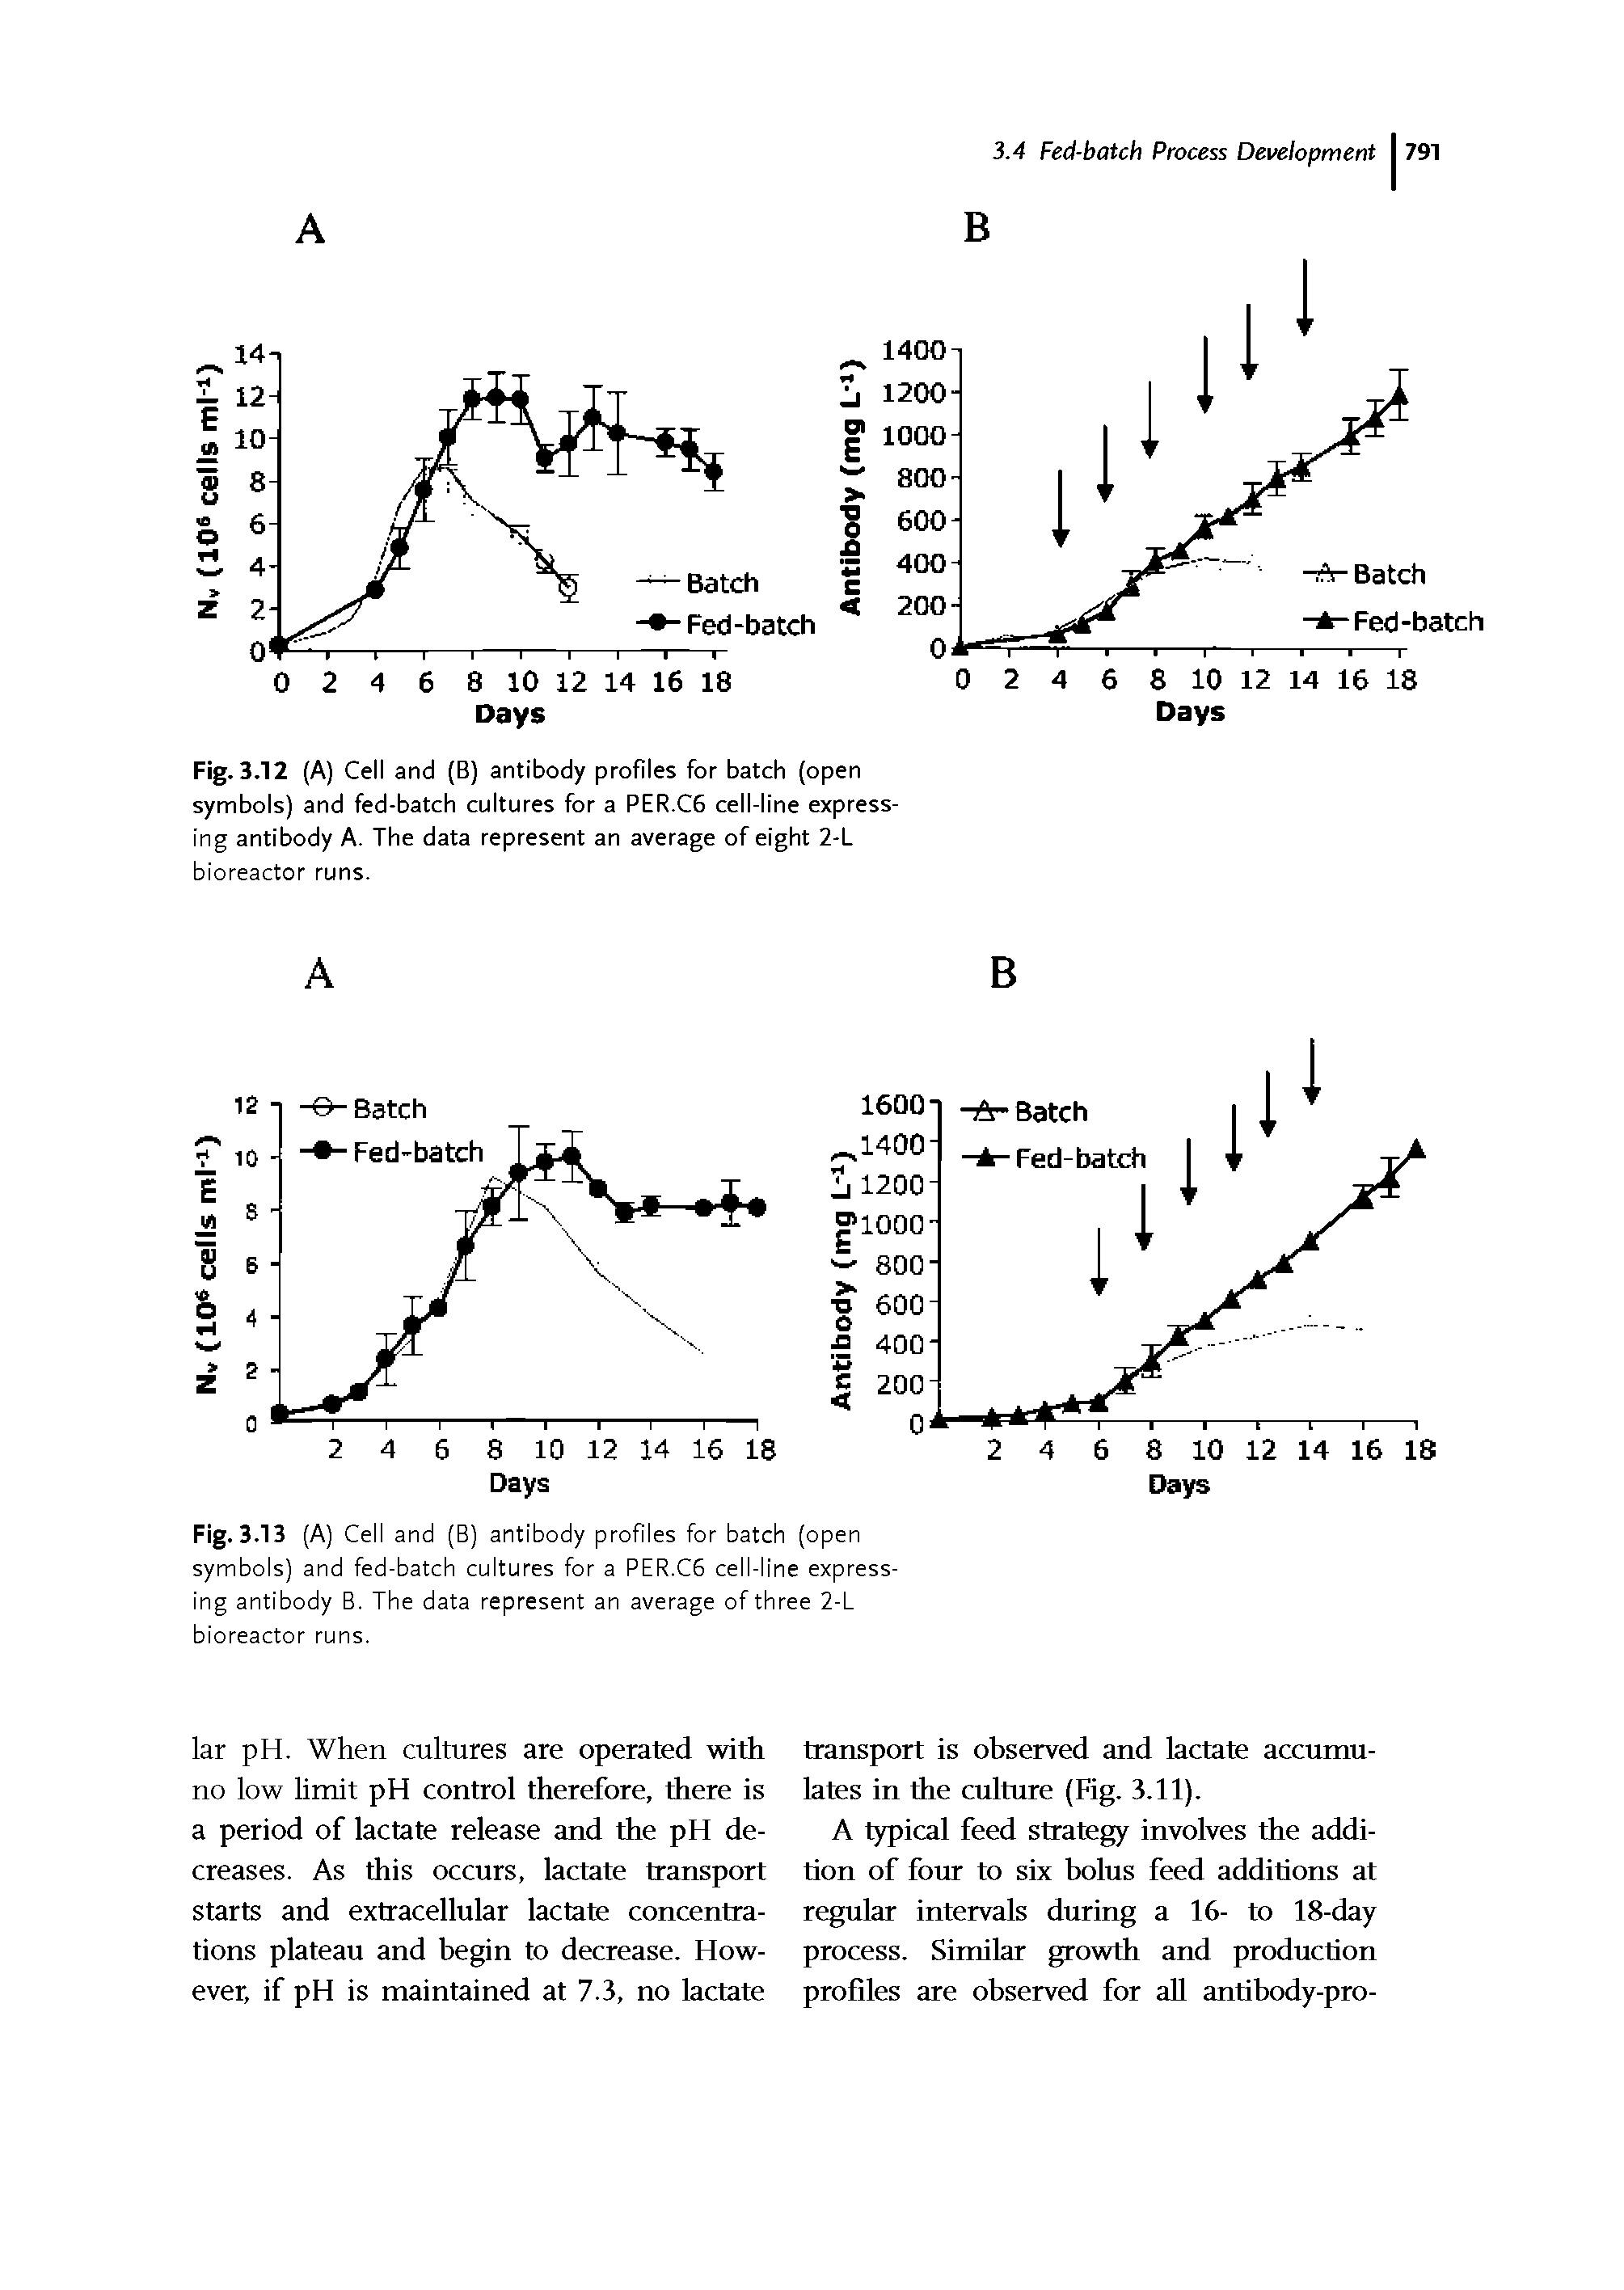 Fig. 3.12 (A) Cell and (B) antibody profiles for batch (open symbols) and fed-batch cultures for a PER.C5 cell-line expressing antibody A. The data represent an average of eight 2-L bioreactor runs.